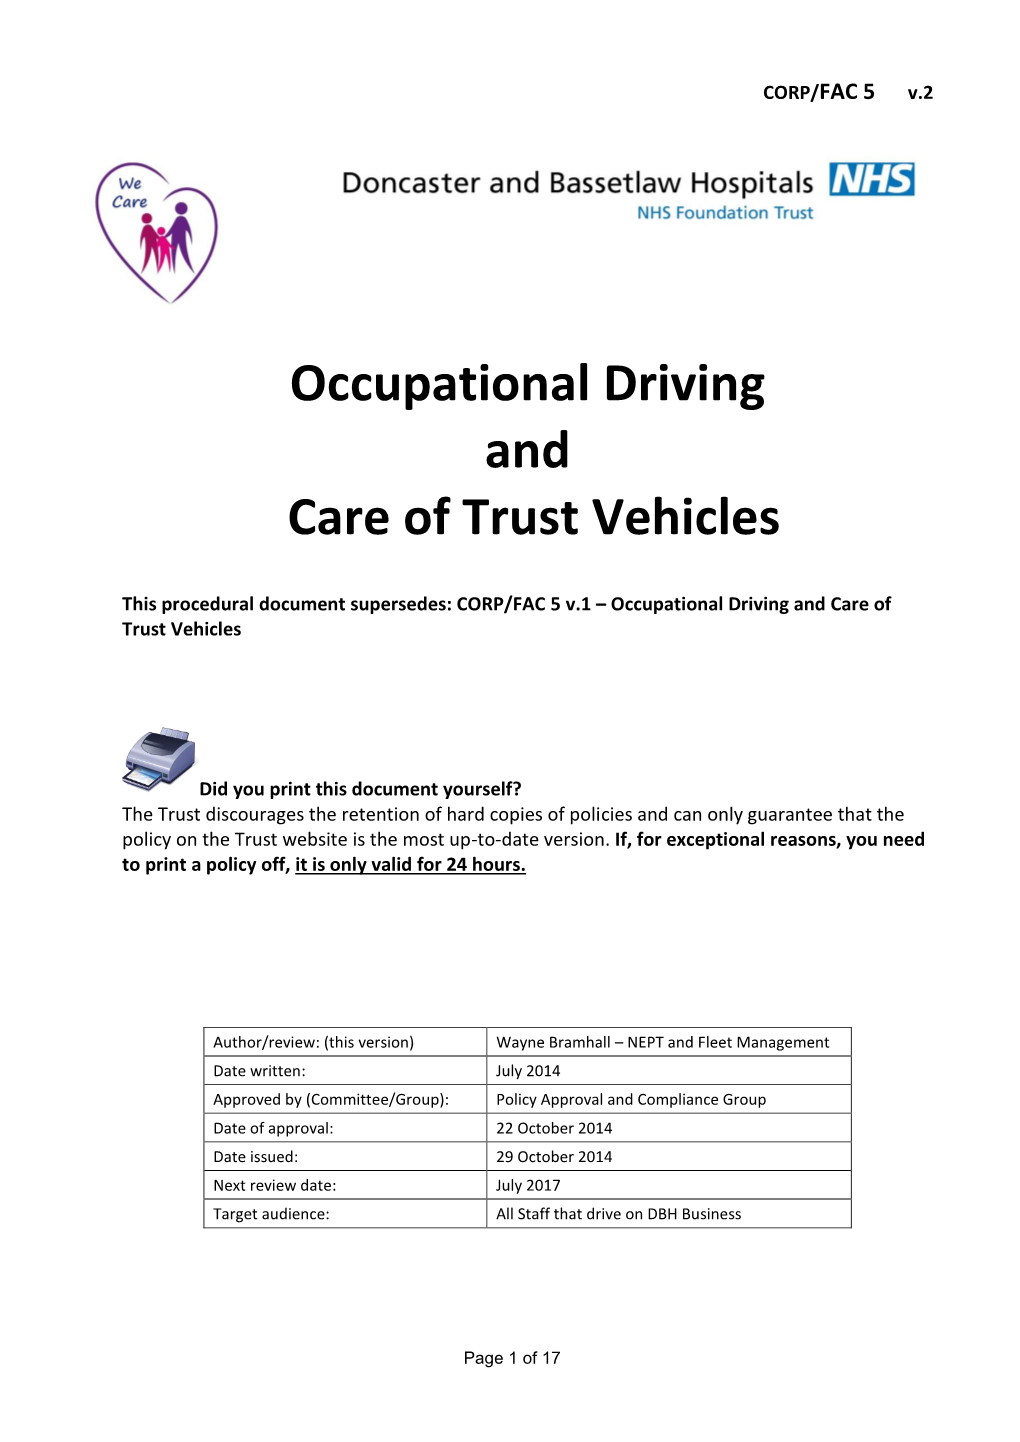 Occupational Driving and Care of Trust Vehicles